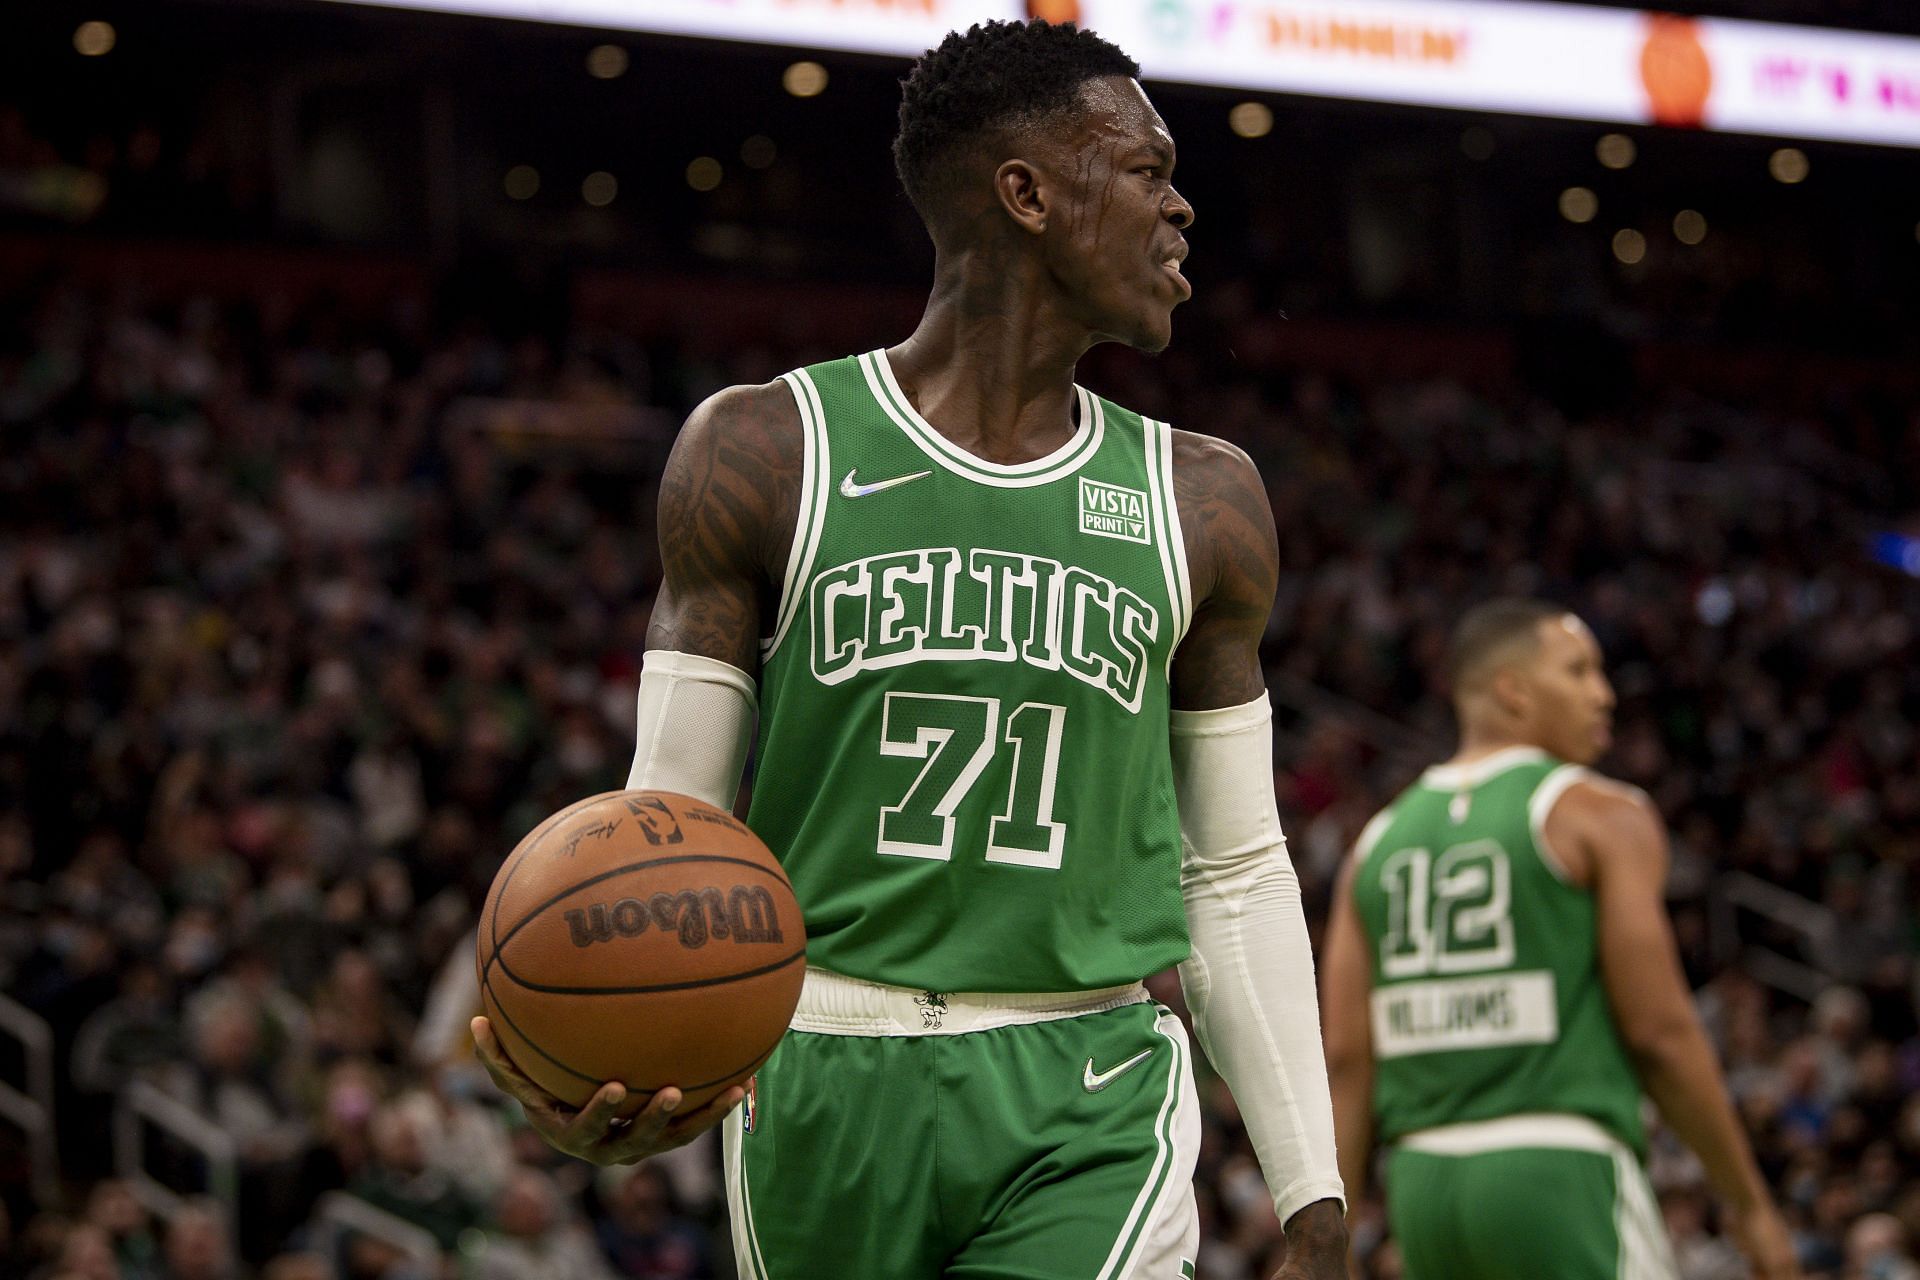 Boston Celtics guard Dennis Schroder during the game against the LA Lakers